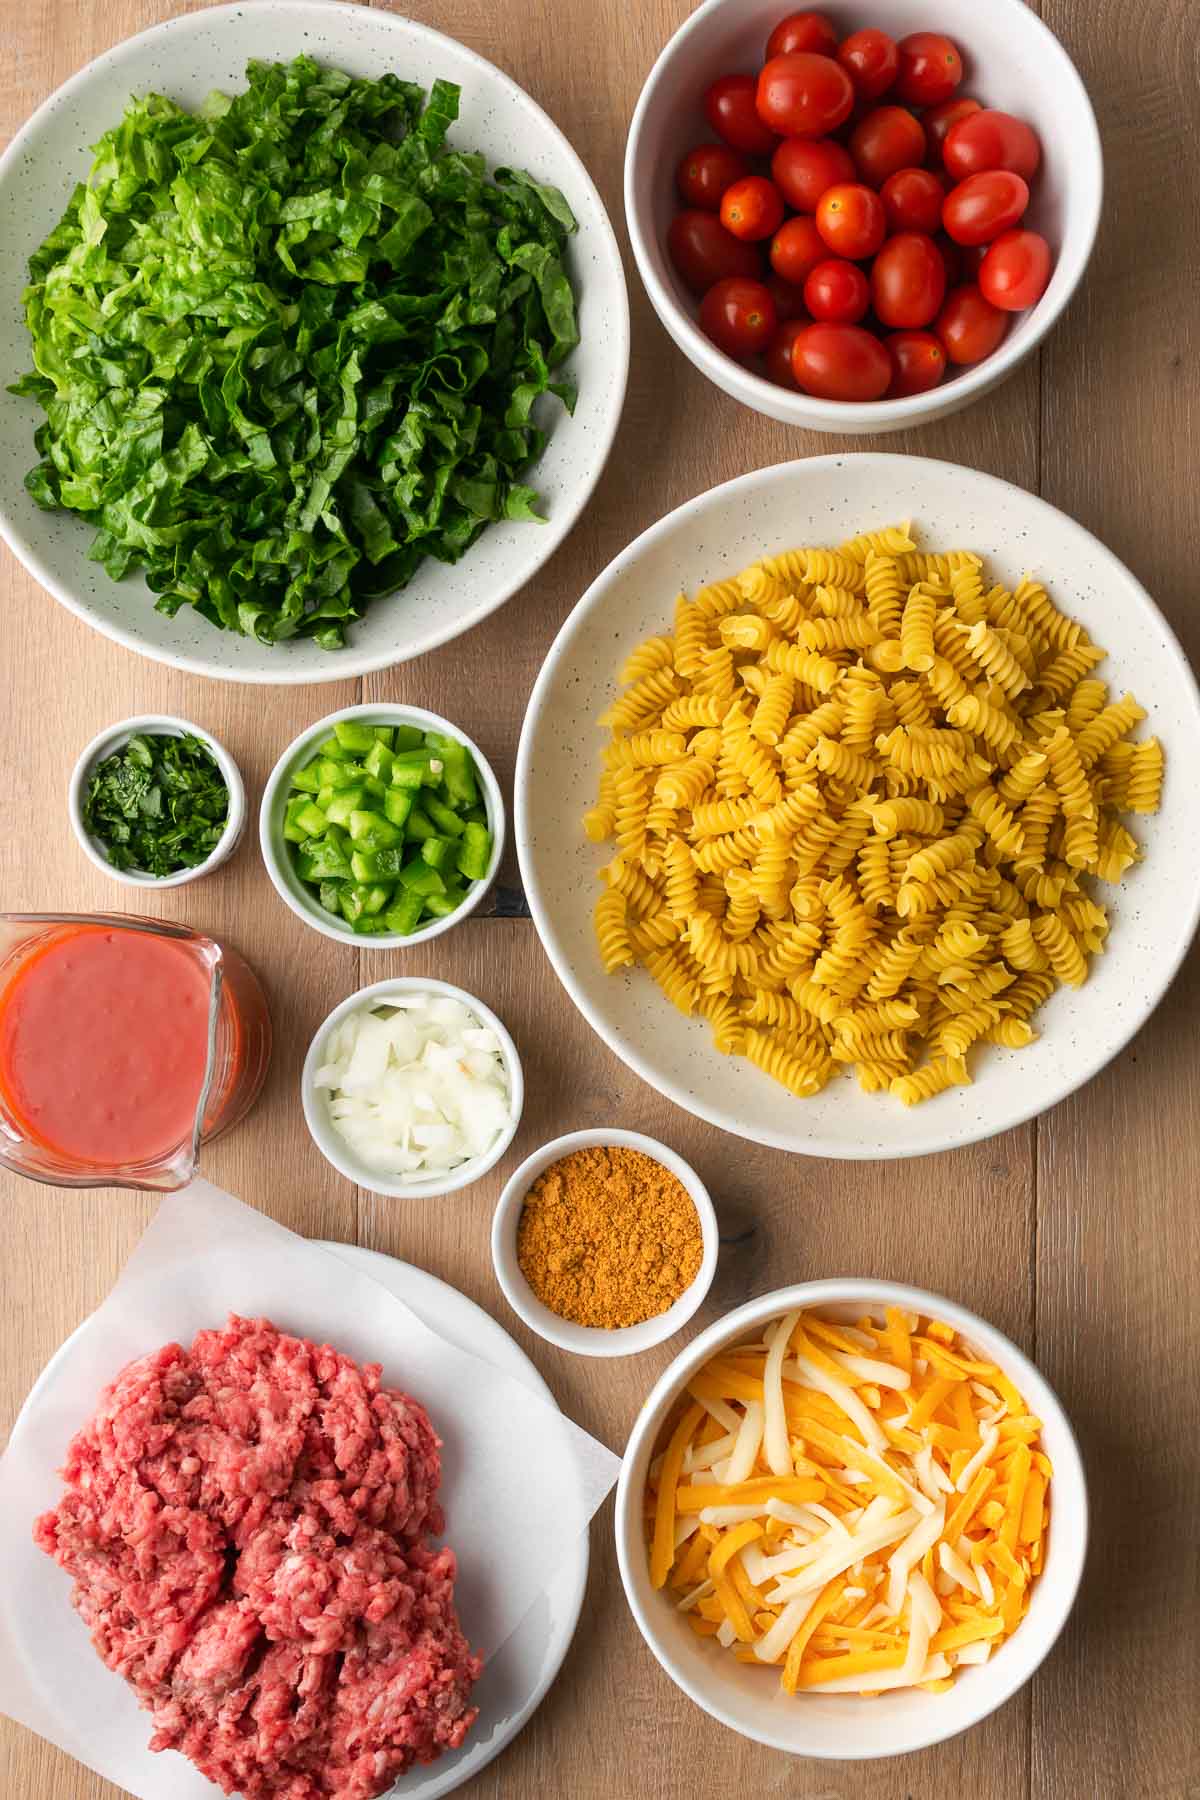 Ingredients for Taco Pasta Salad shown in white bowls.